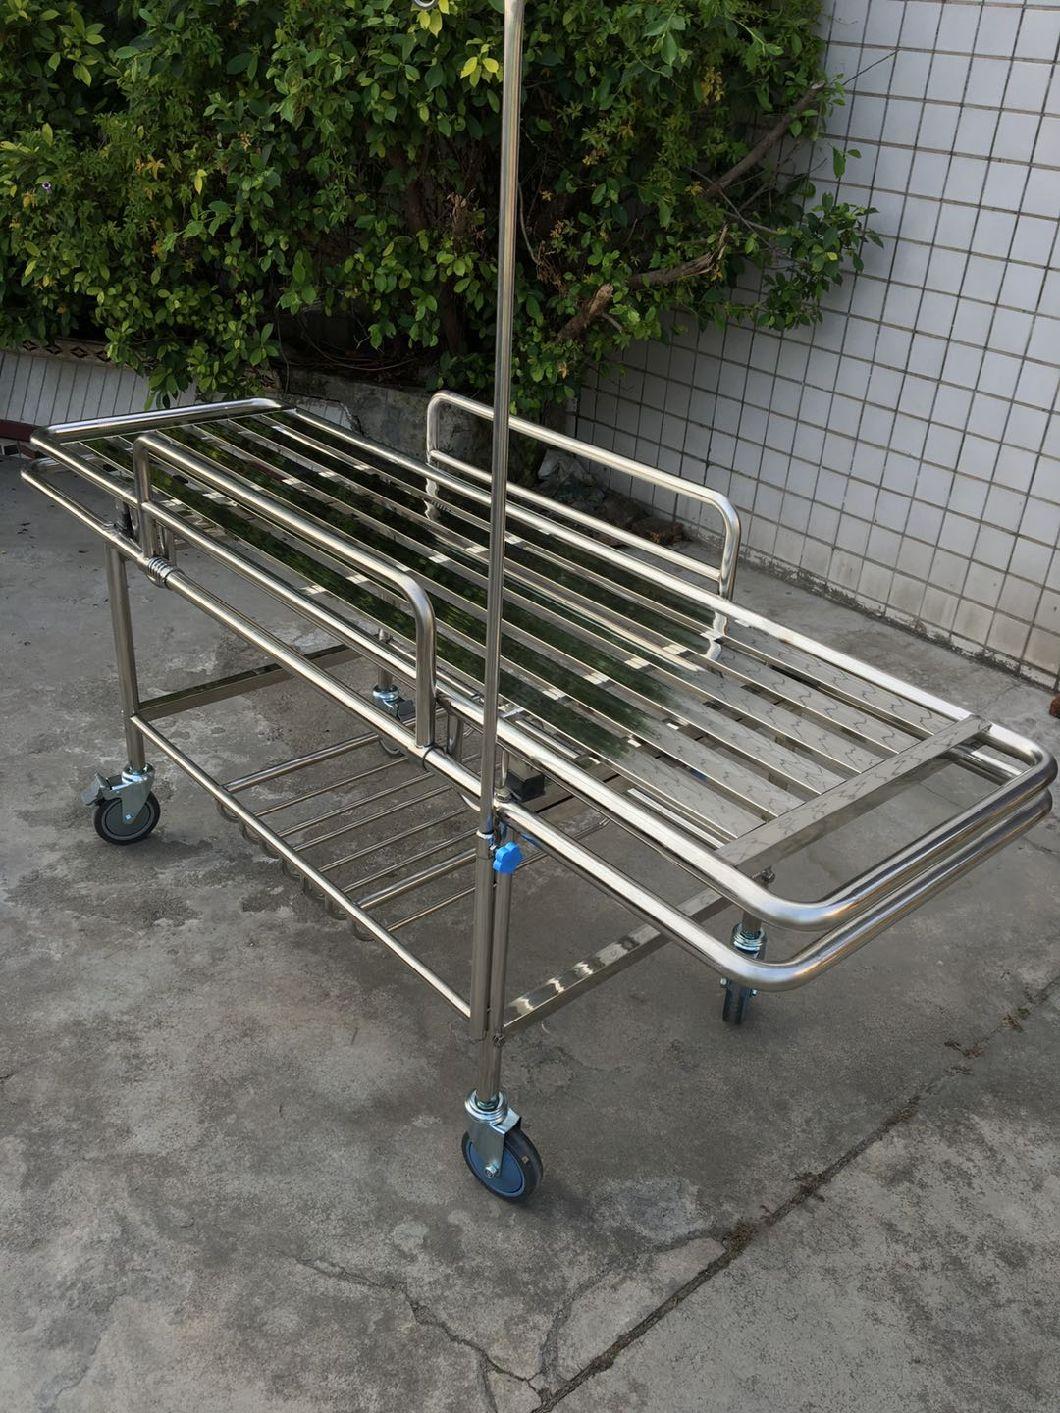 Stainless Steel Stretcher with Four Castors